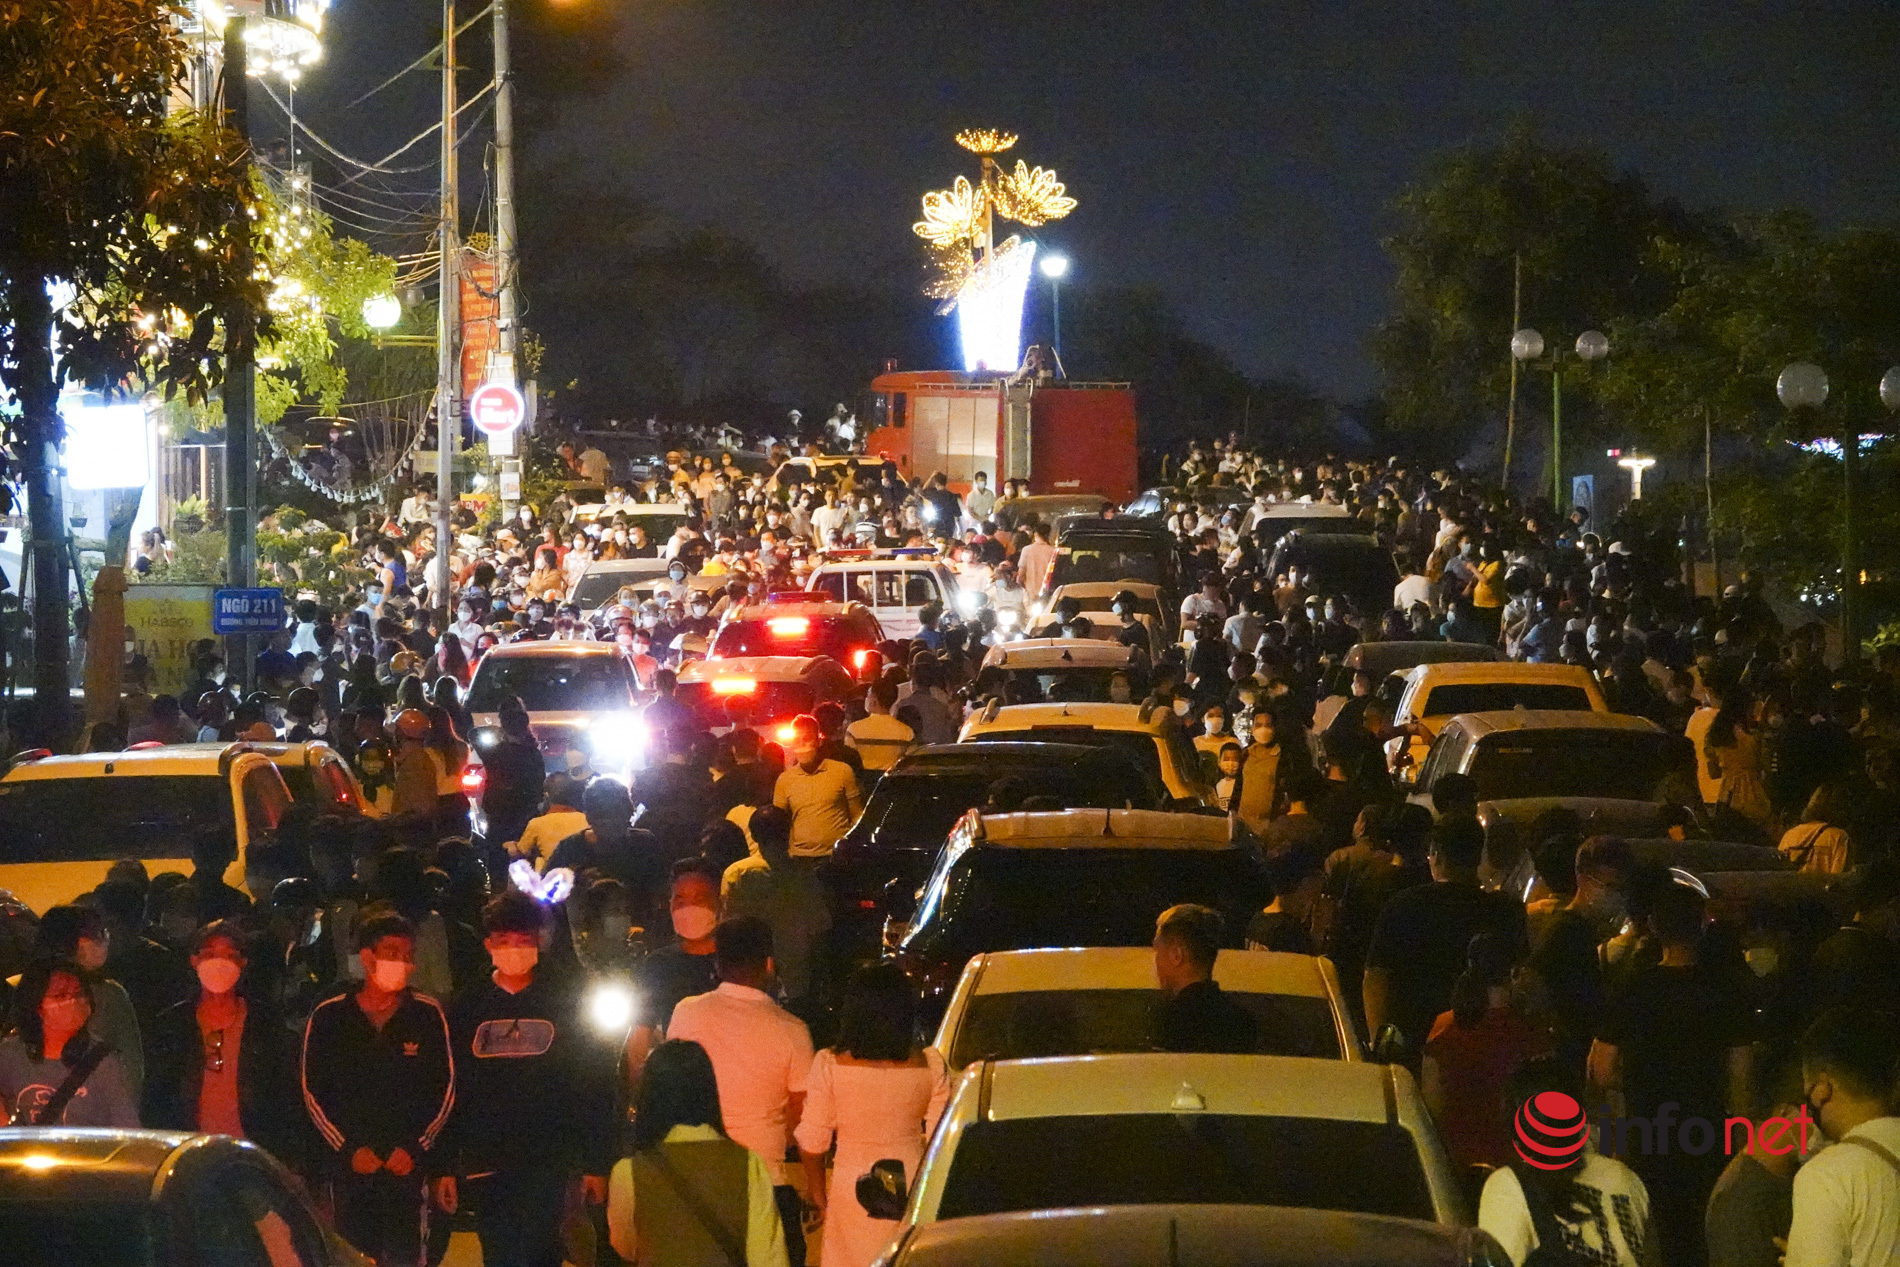 Phu Tho: Thousands of people flocked to Van Lang Park to watch fireworks early, the streets were packed